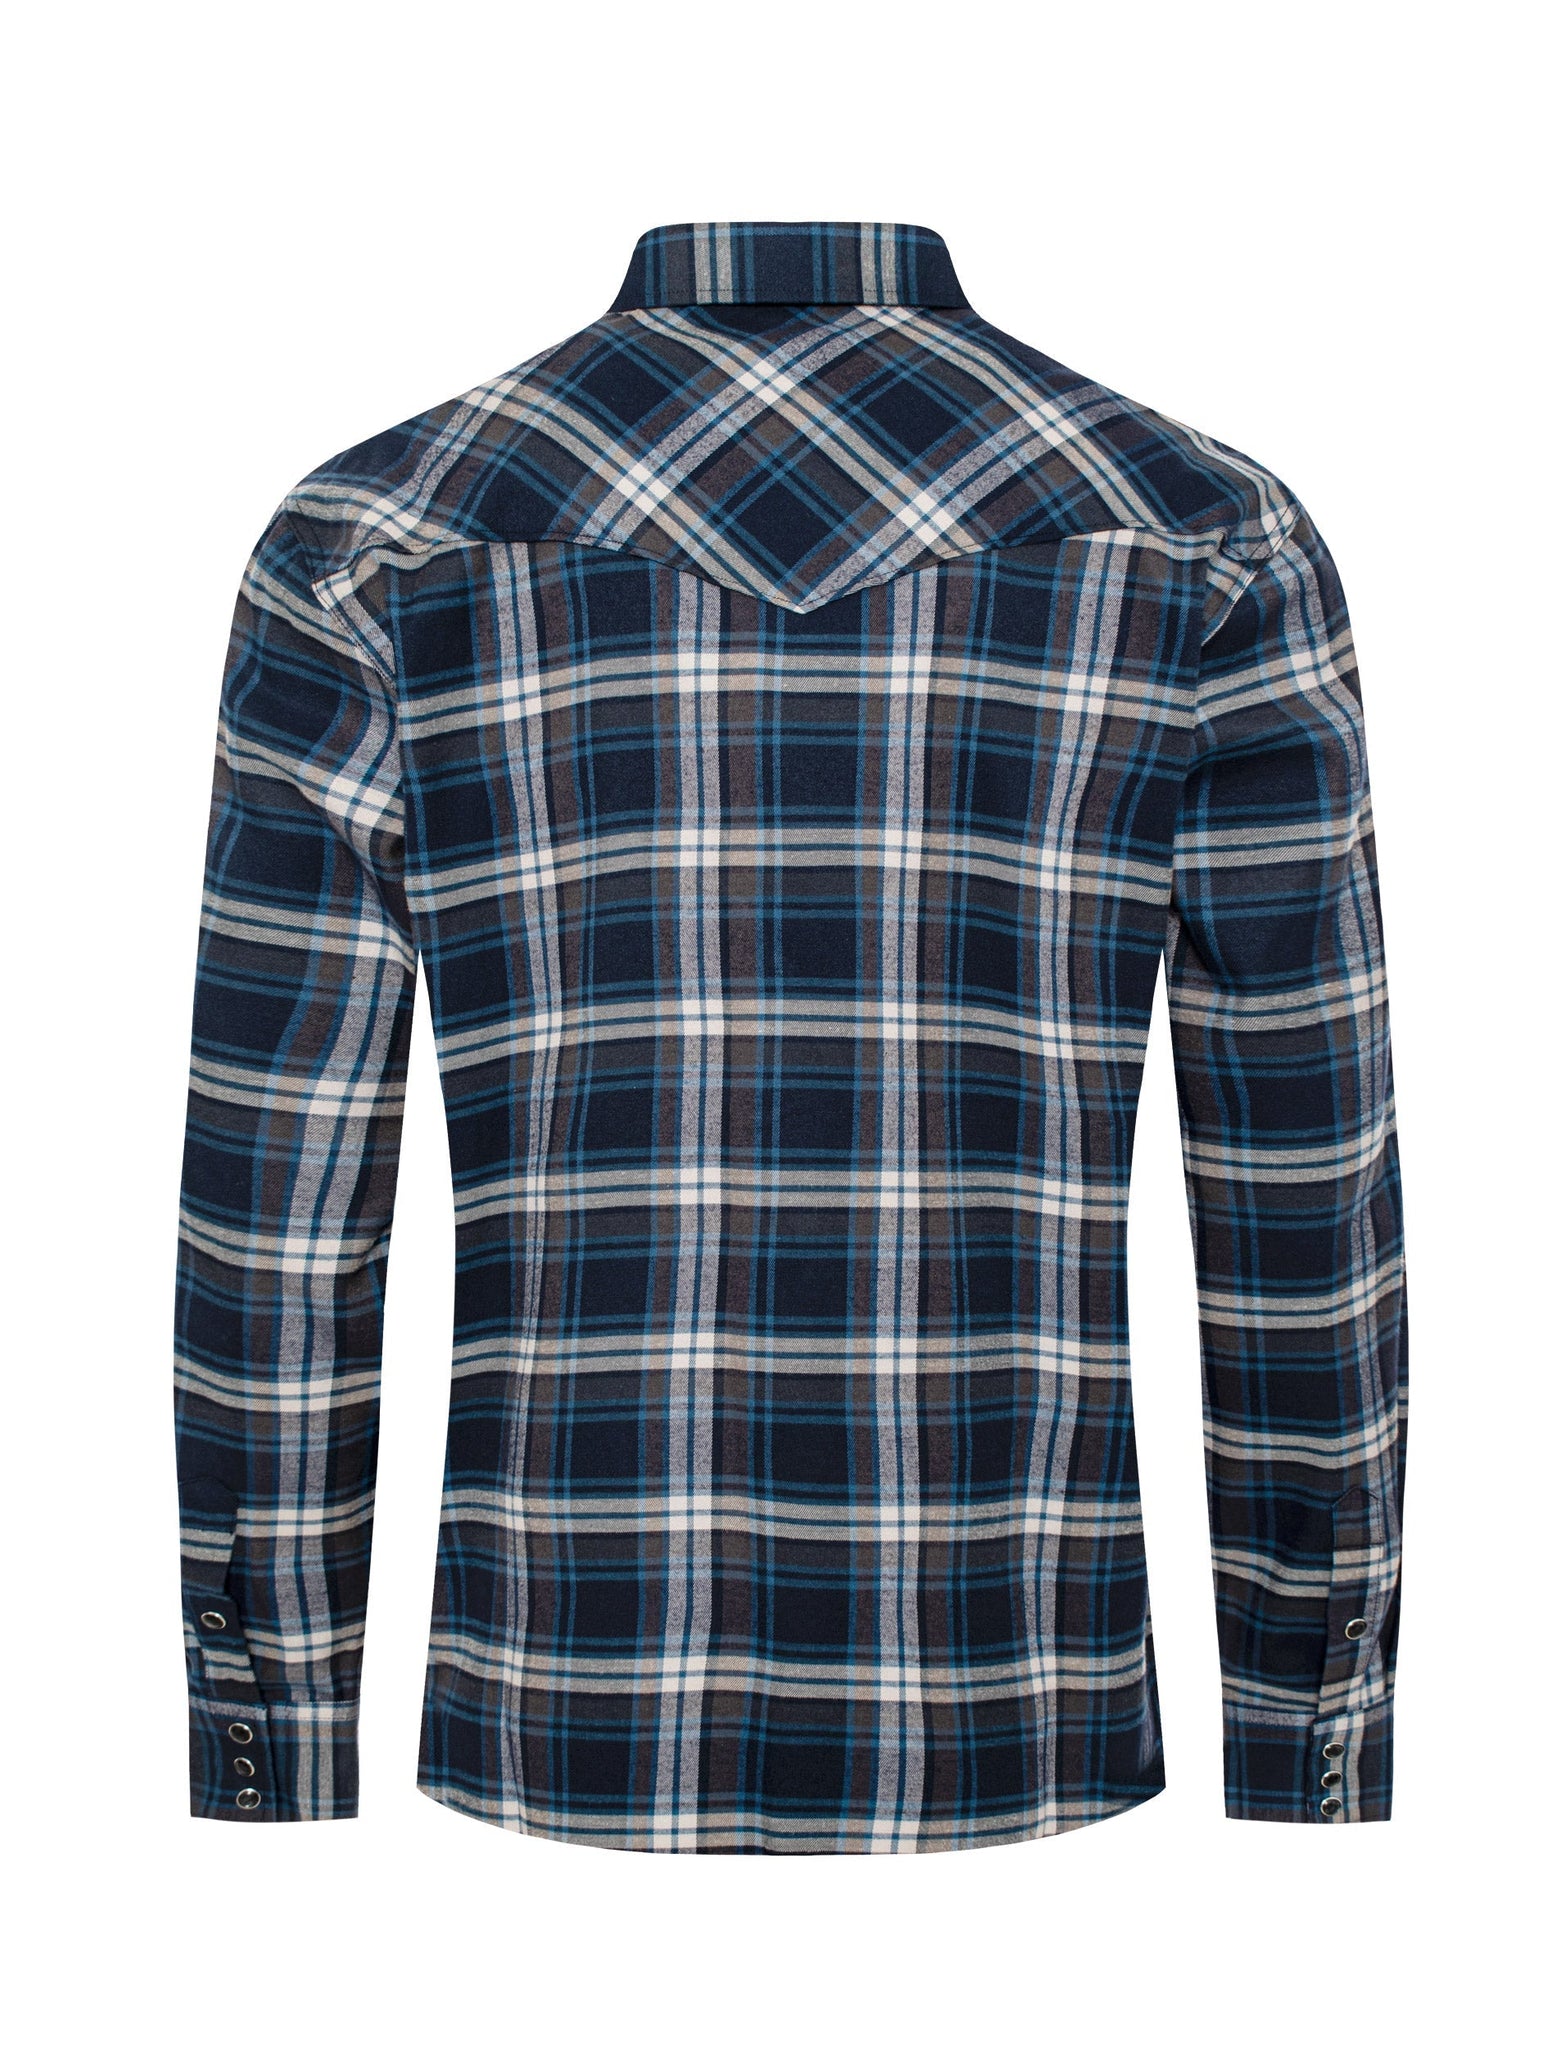 Men's Western Flannel Shirts With Snap Buttons -FLS300-308